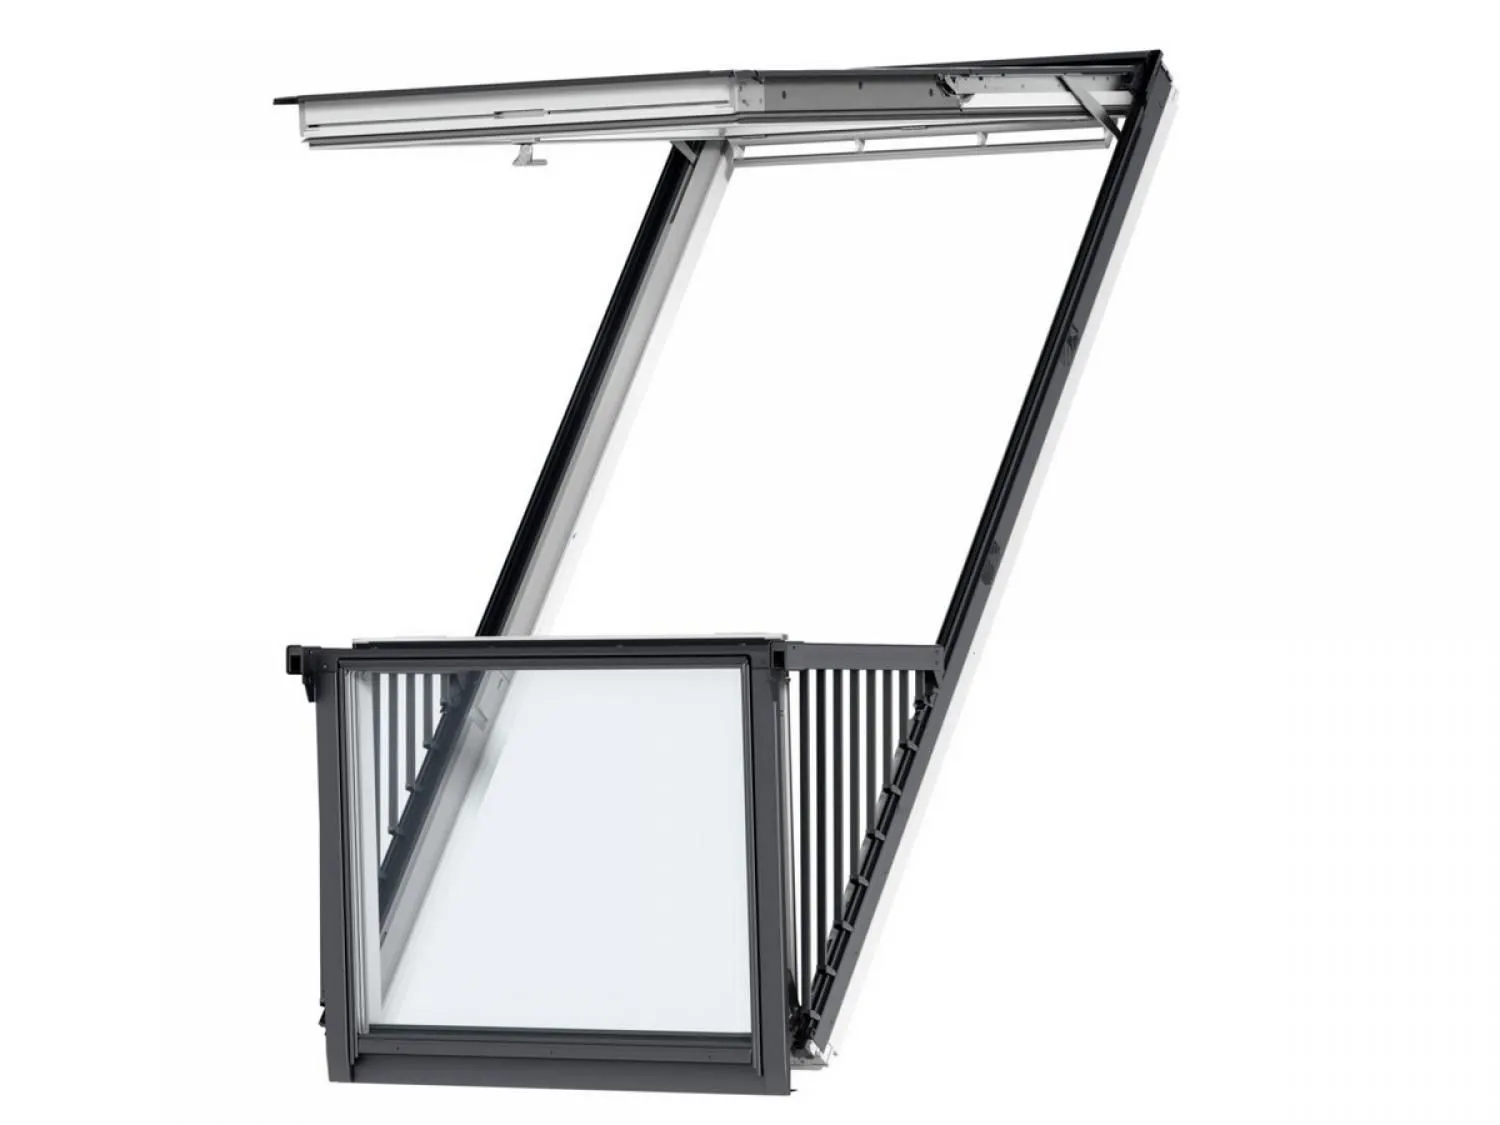 Velux Single CABRIO Balcony Roof Window  940 x 2520   White Painted   GDL PK19 SD0W001